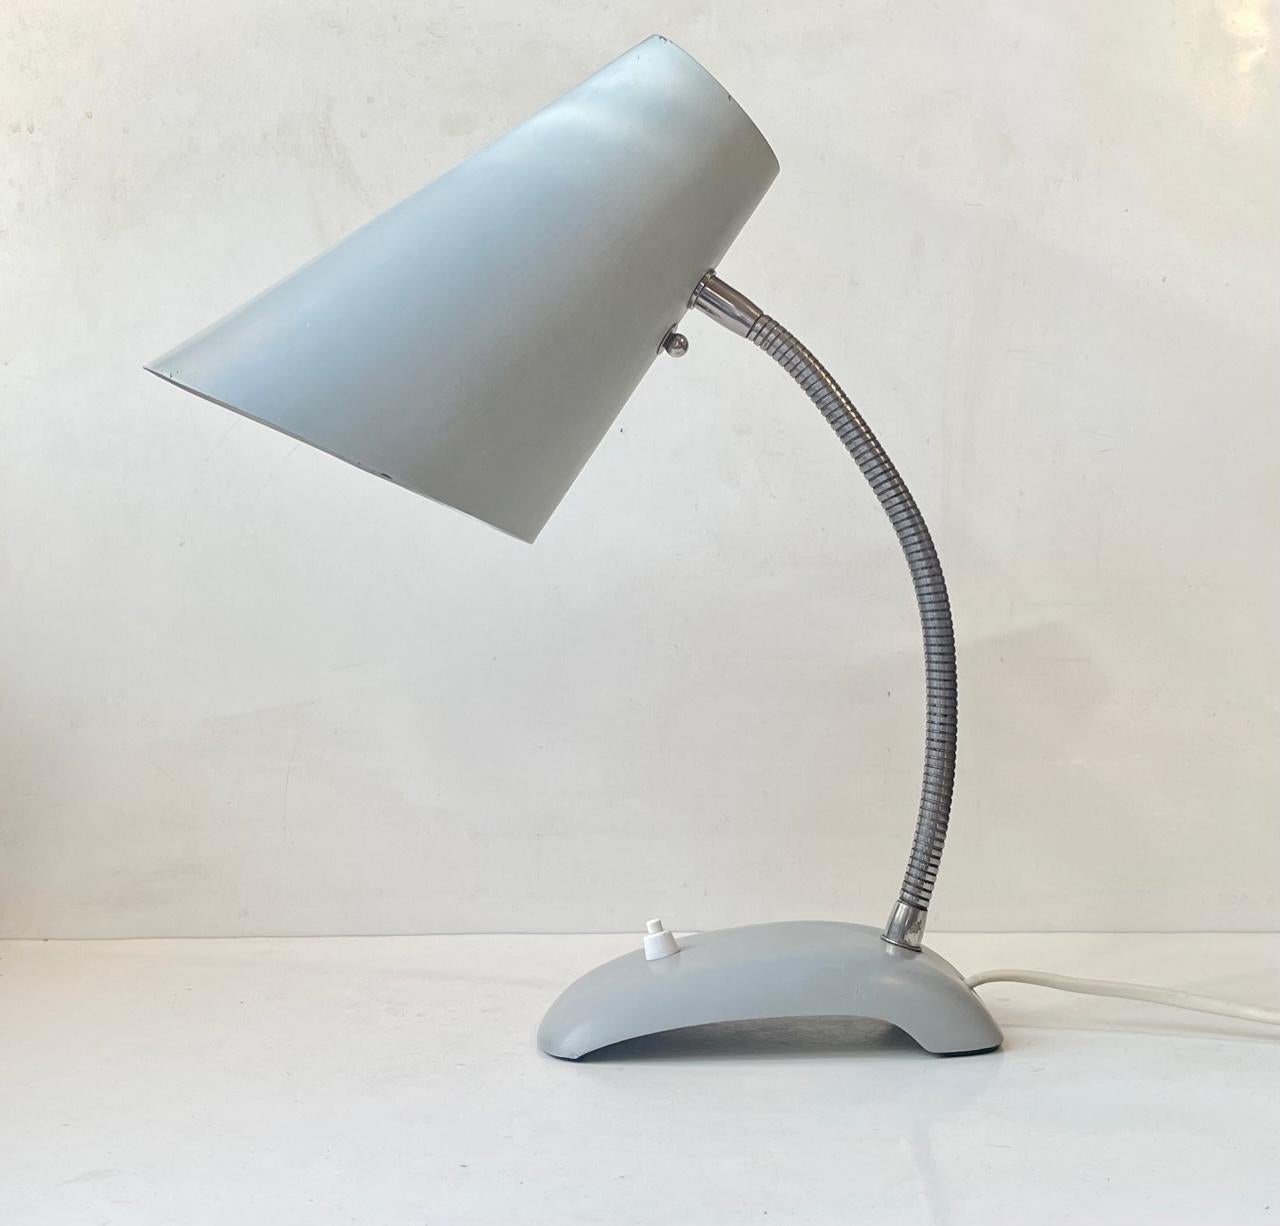 Bauhaus inspired midcentury fully adjustable desk lamp by ASEA Sweden. Made during the 1950s in a style reminiscent of Arne Jacobsen and Louis Poulsen. It is executed in powder coated steel and features a curvy/slightly concave base with on/of